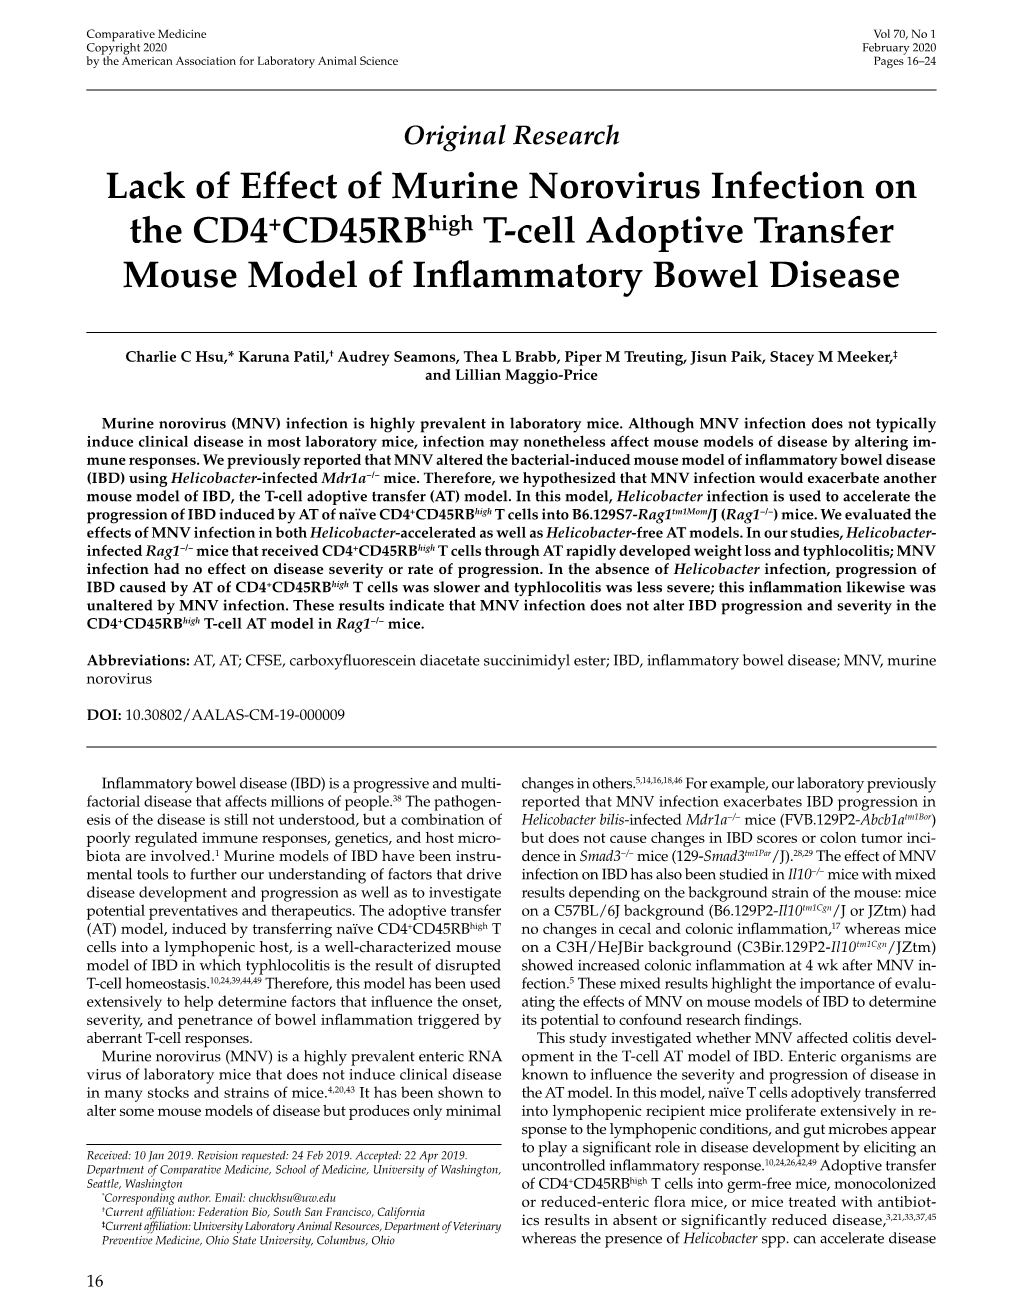 Lack of Effect of Murine Norovirus Infection on the CD4+Cd45rbhigh T-Cell Adoptive Transfer Mouse Model of Inflammatory Bowel Disease